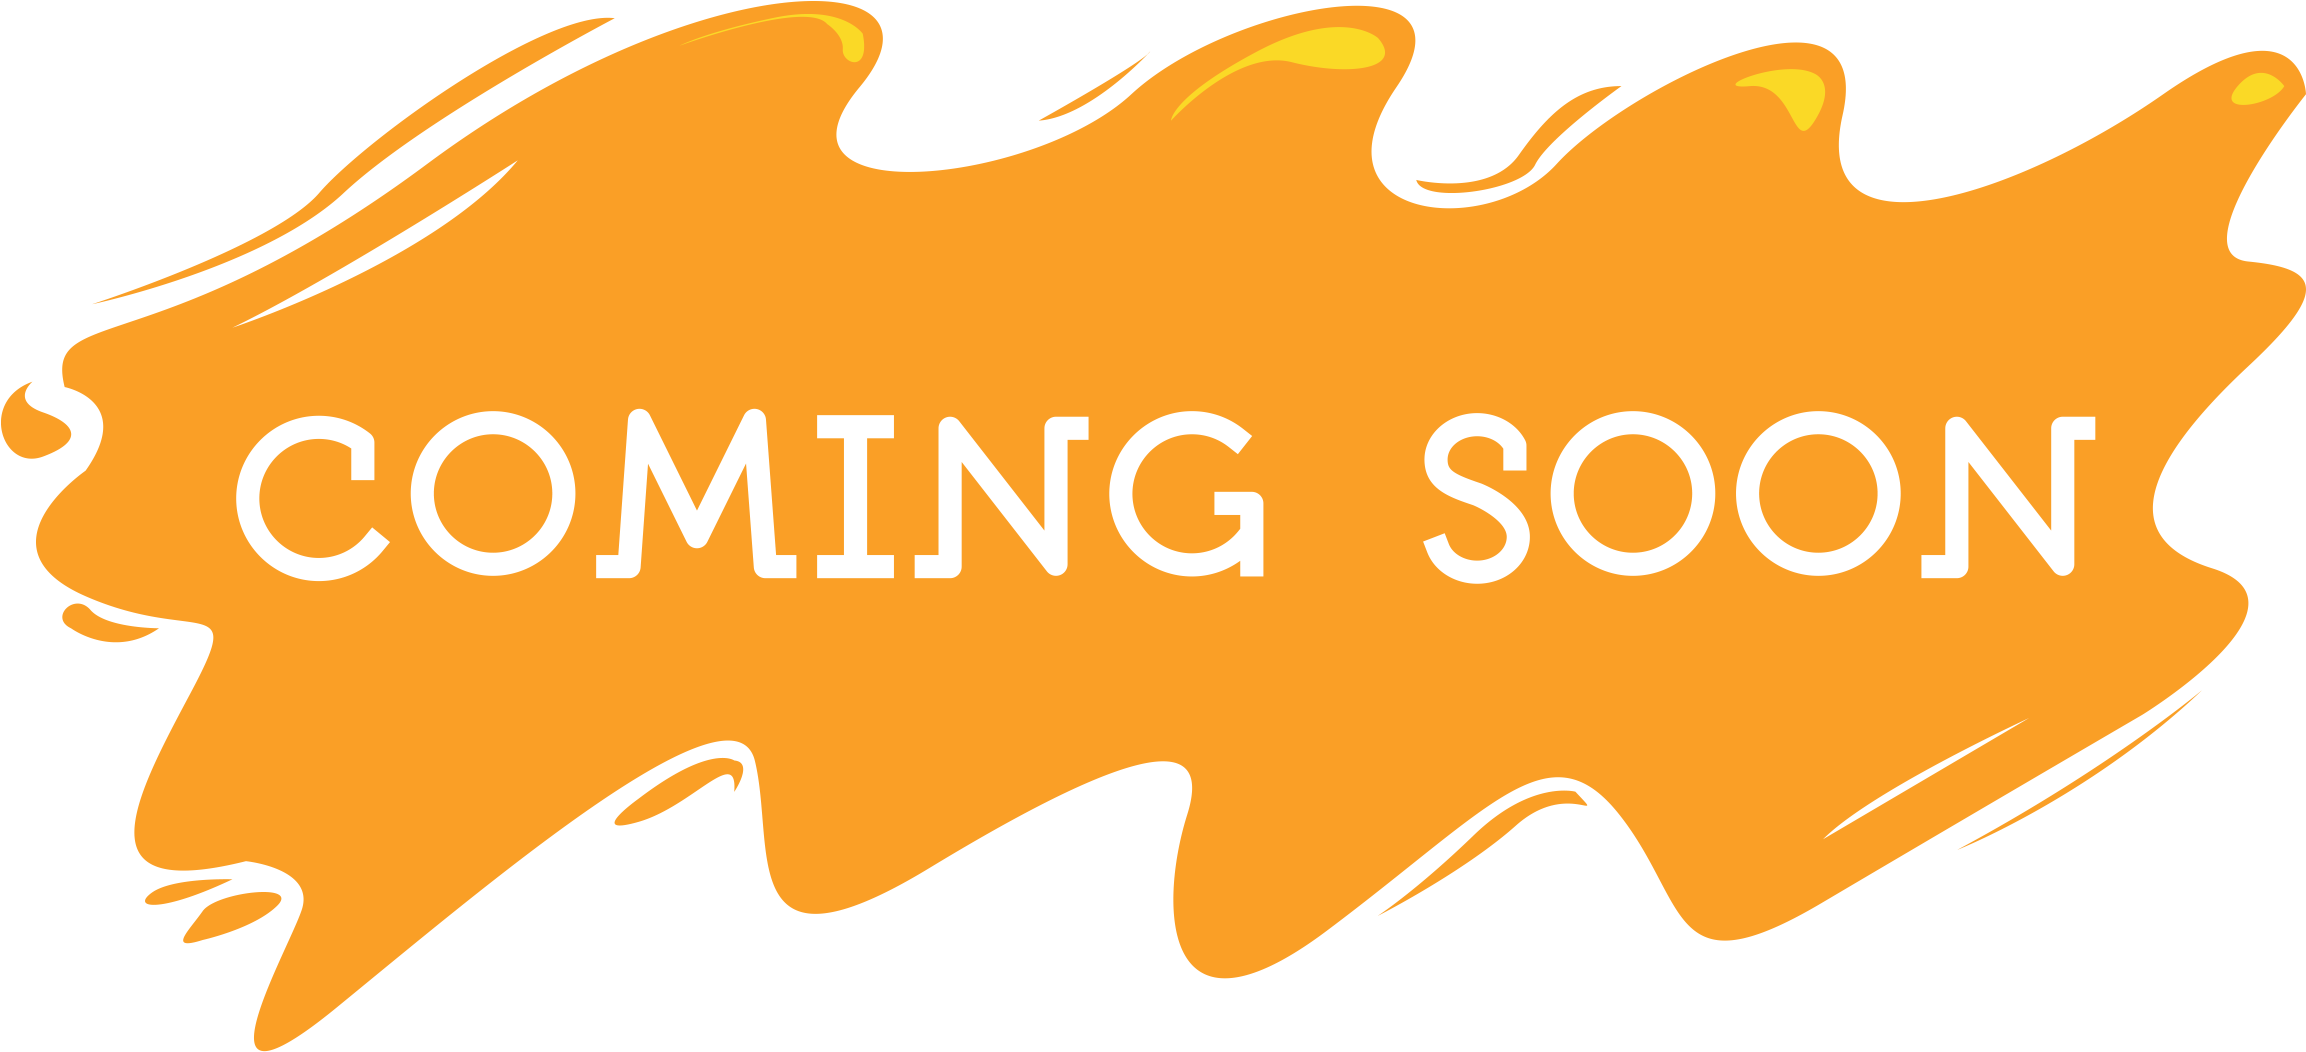 Coming Soon Clipart Transparent Background, Coming Soon Notification  Transparen Background, Coming Soon, Coming Soon Png, Transparent PNG Image  For Free Downloa… | Coming soon logo, Clip art, Coming soon